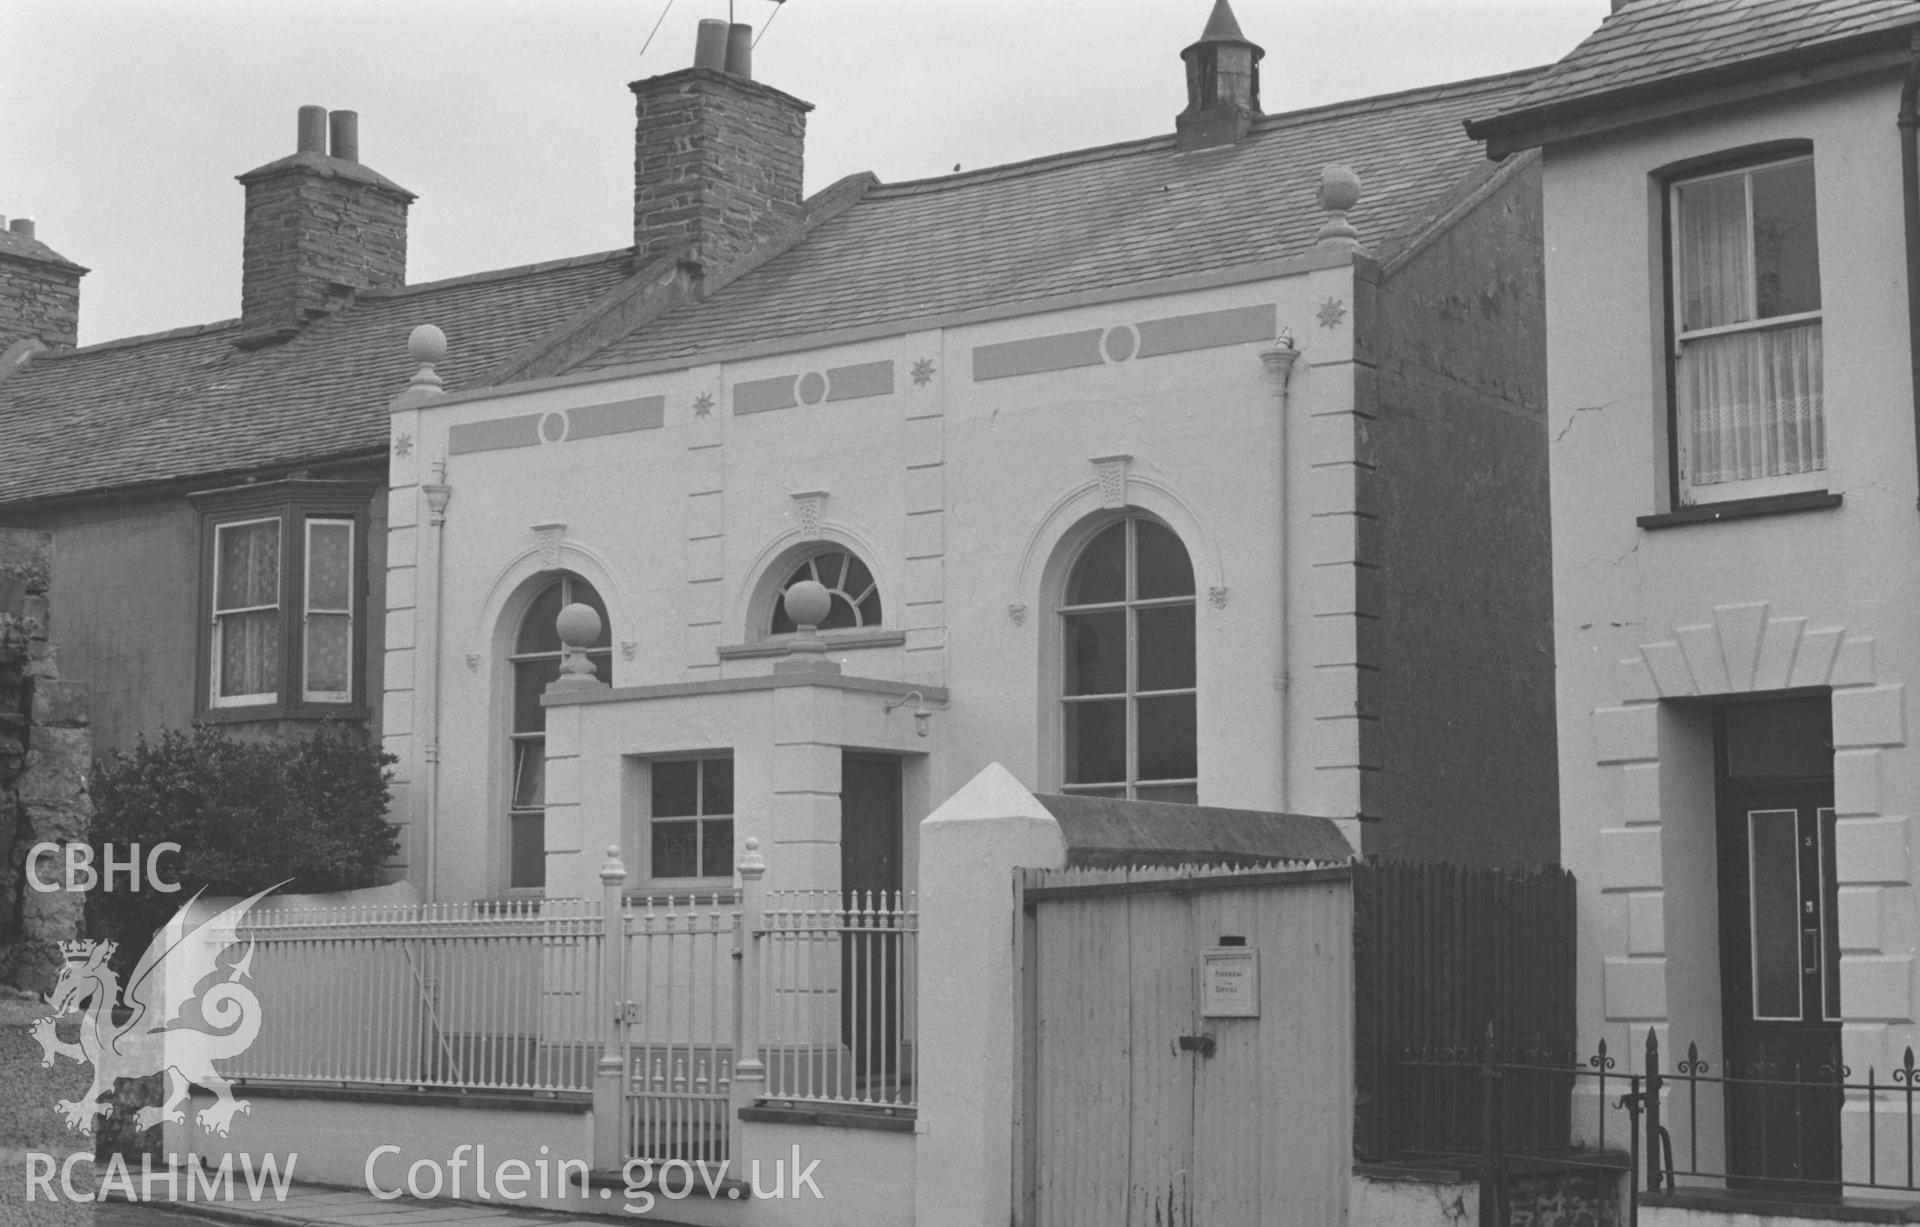 Digital copy of a black and white negative showing chapel in Poplar Row, opposite Skinners Street. Photographed by Arthur Chater on 3 January 1969. Looking east from Grid Reference SN 5869 8175.